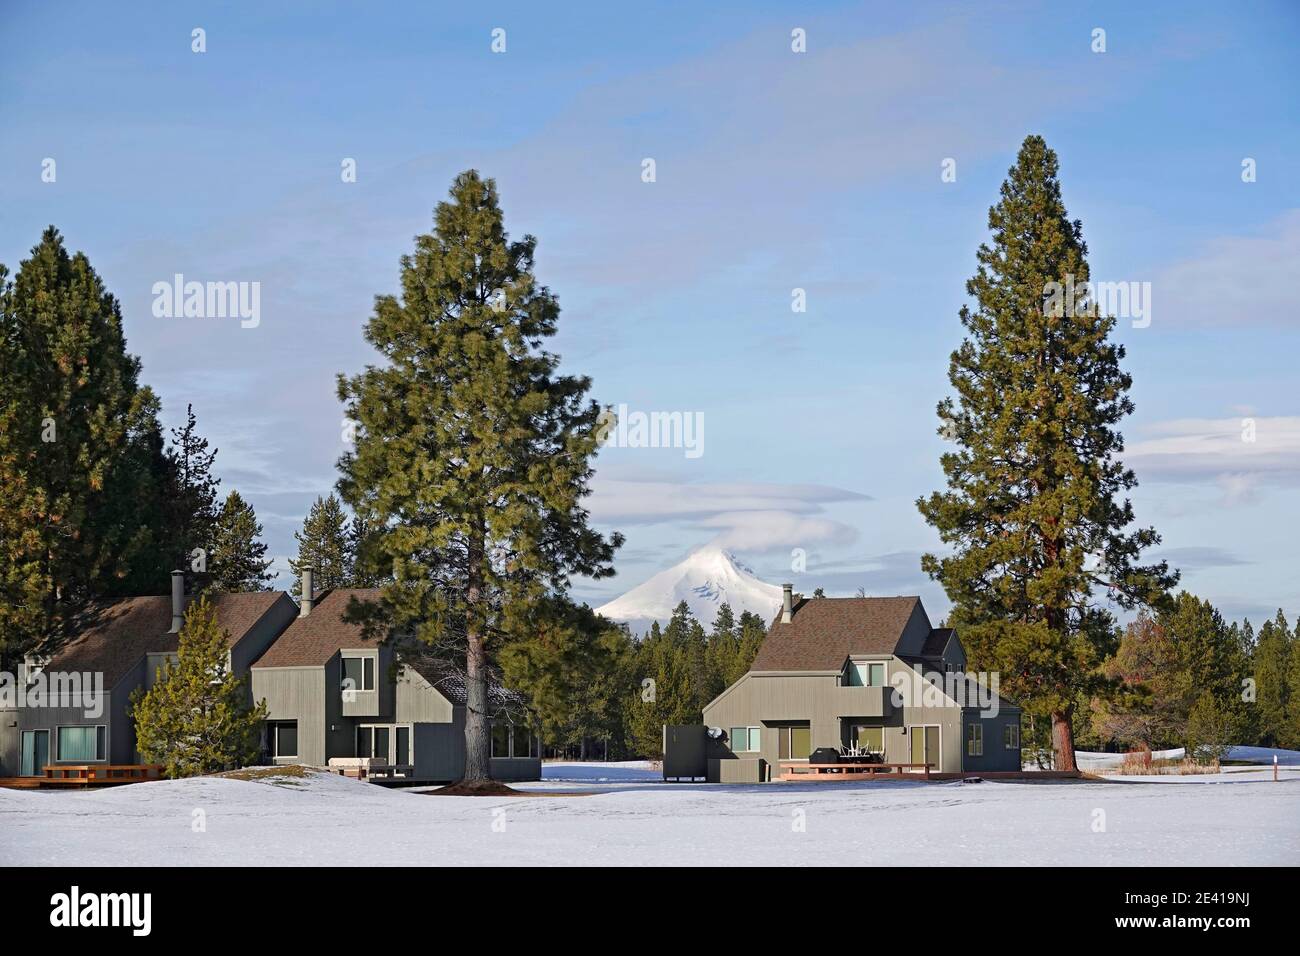 Large rental cabins and Condos at Black Butte Ranch, a private resort in the Cascade Mountains near the small town of Sisters, Oregon. Stock Photo